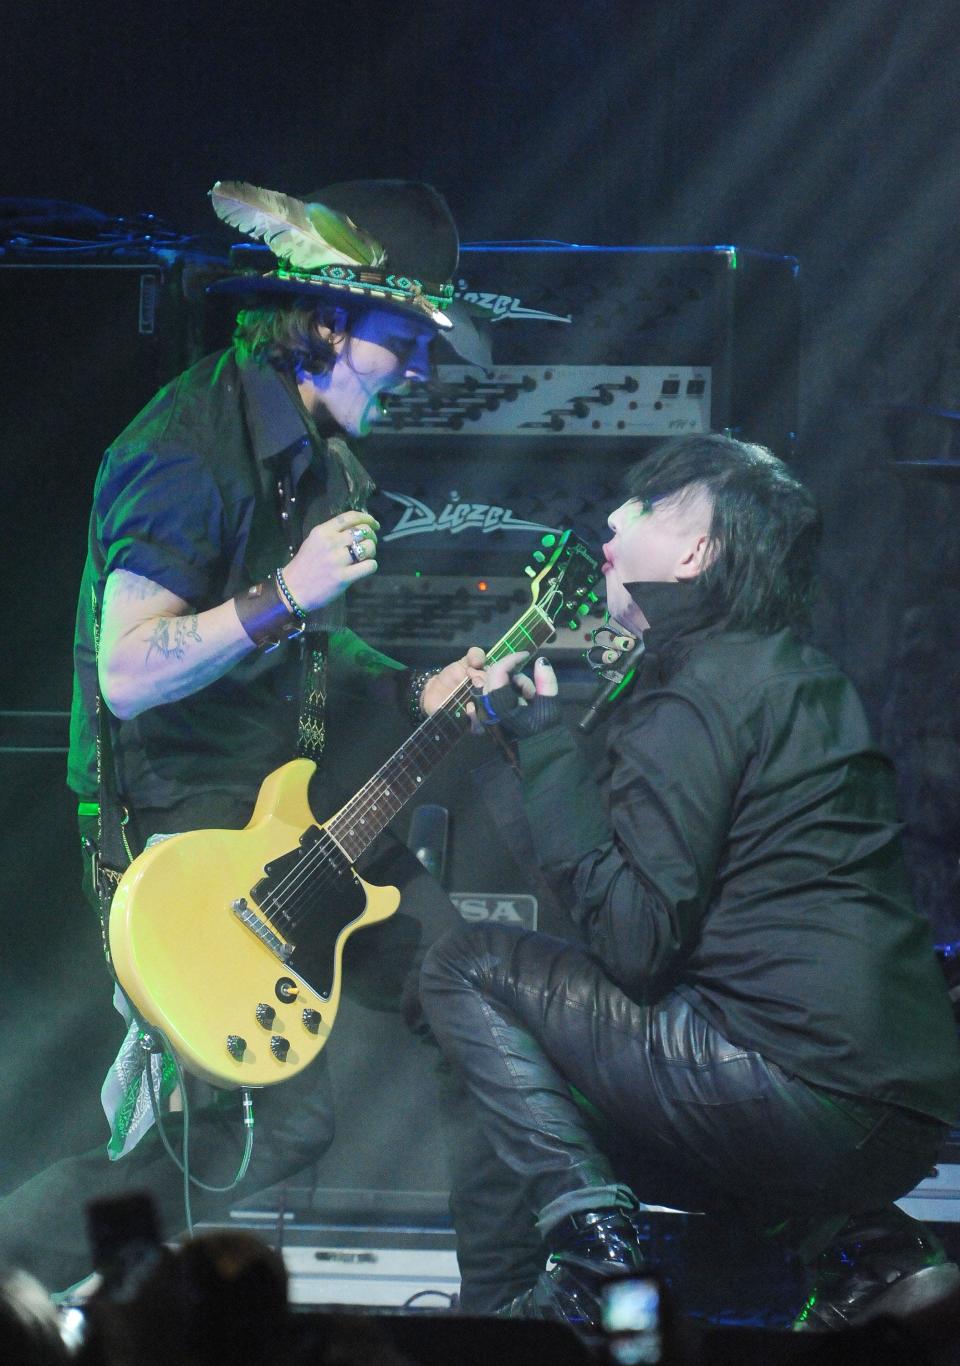 Johnny Depp (left) and Marilyn Manson perform live at the 4th annual Revolver Golden Gods Award Show, Wednesday, April 11, 2012, at Club Nokia in Los Angeles.